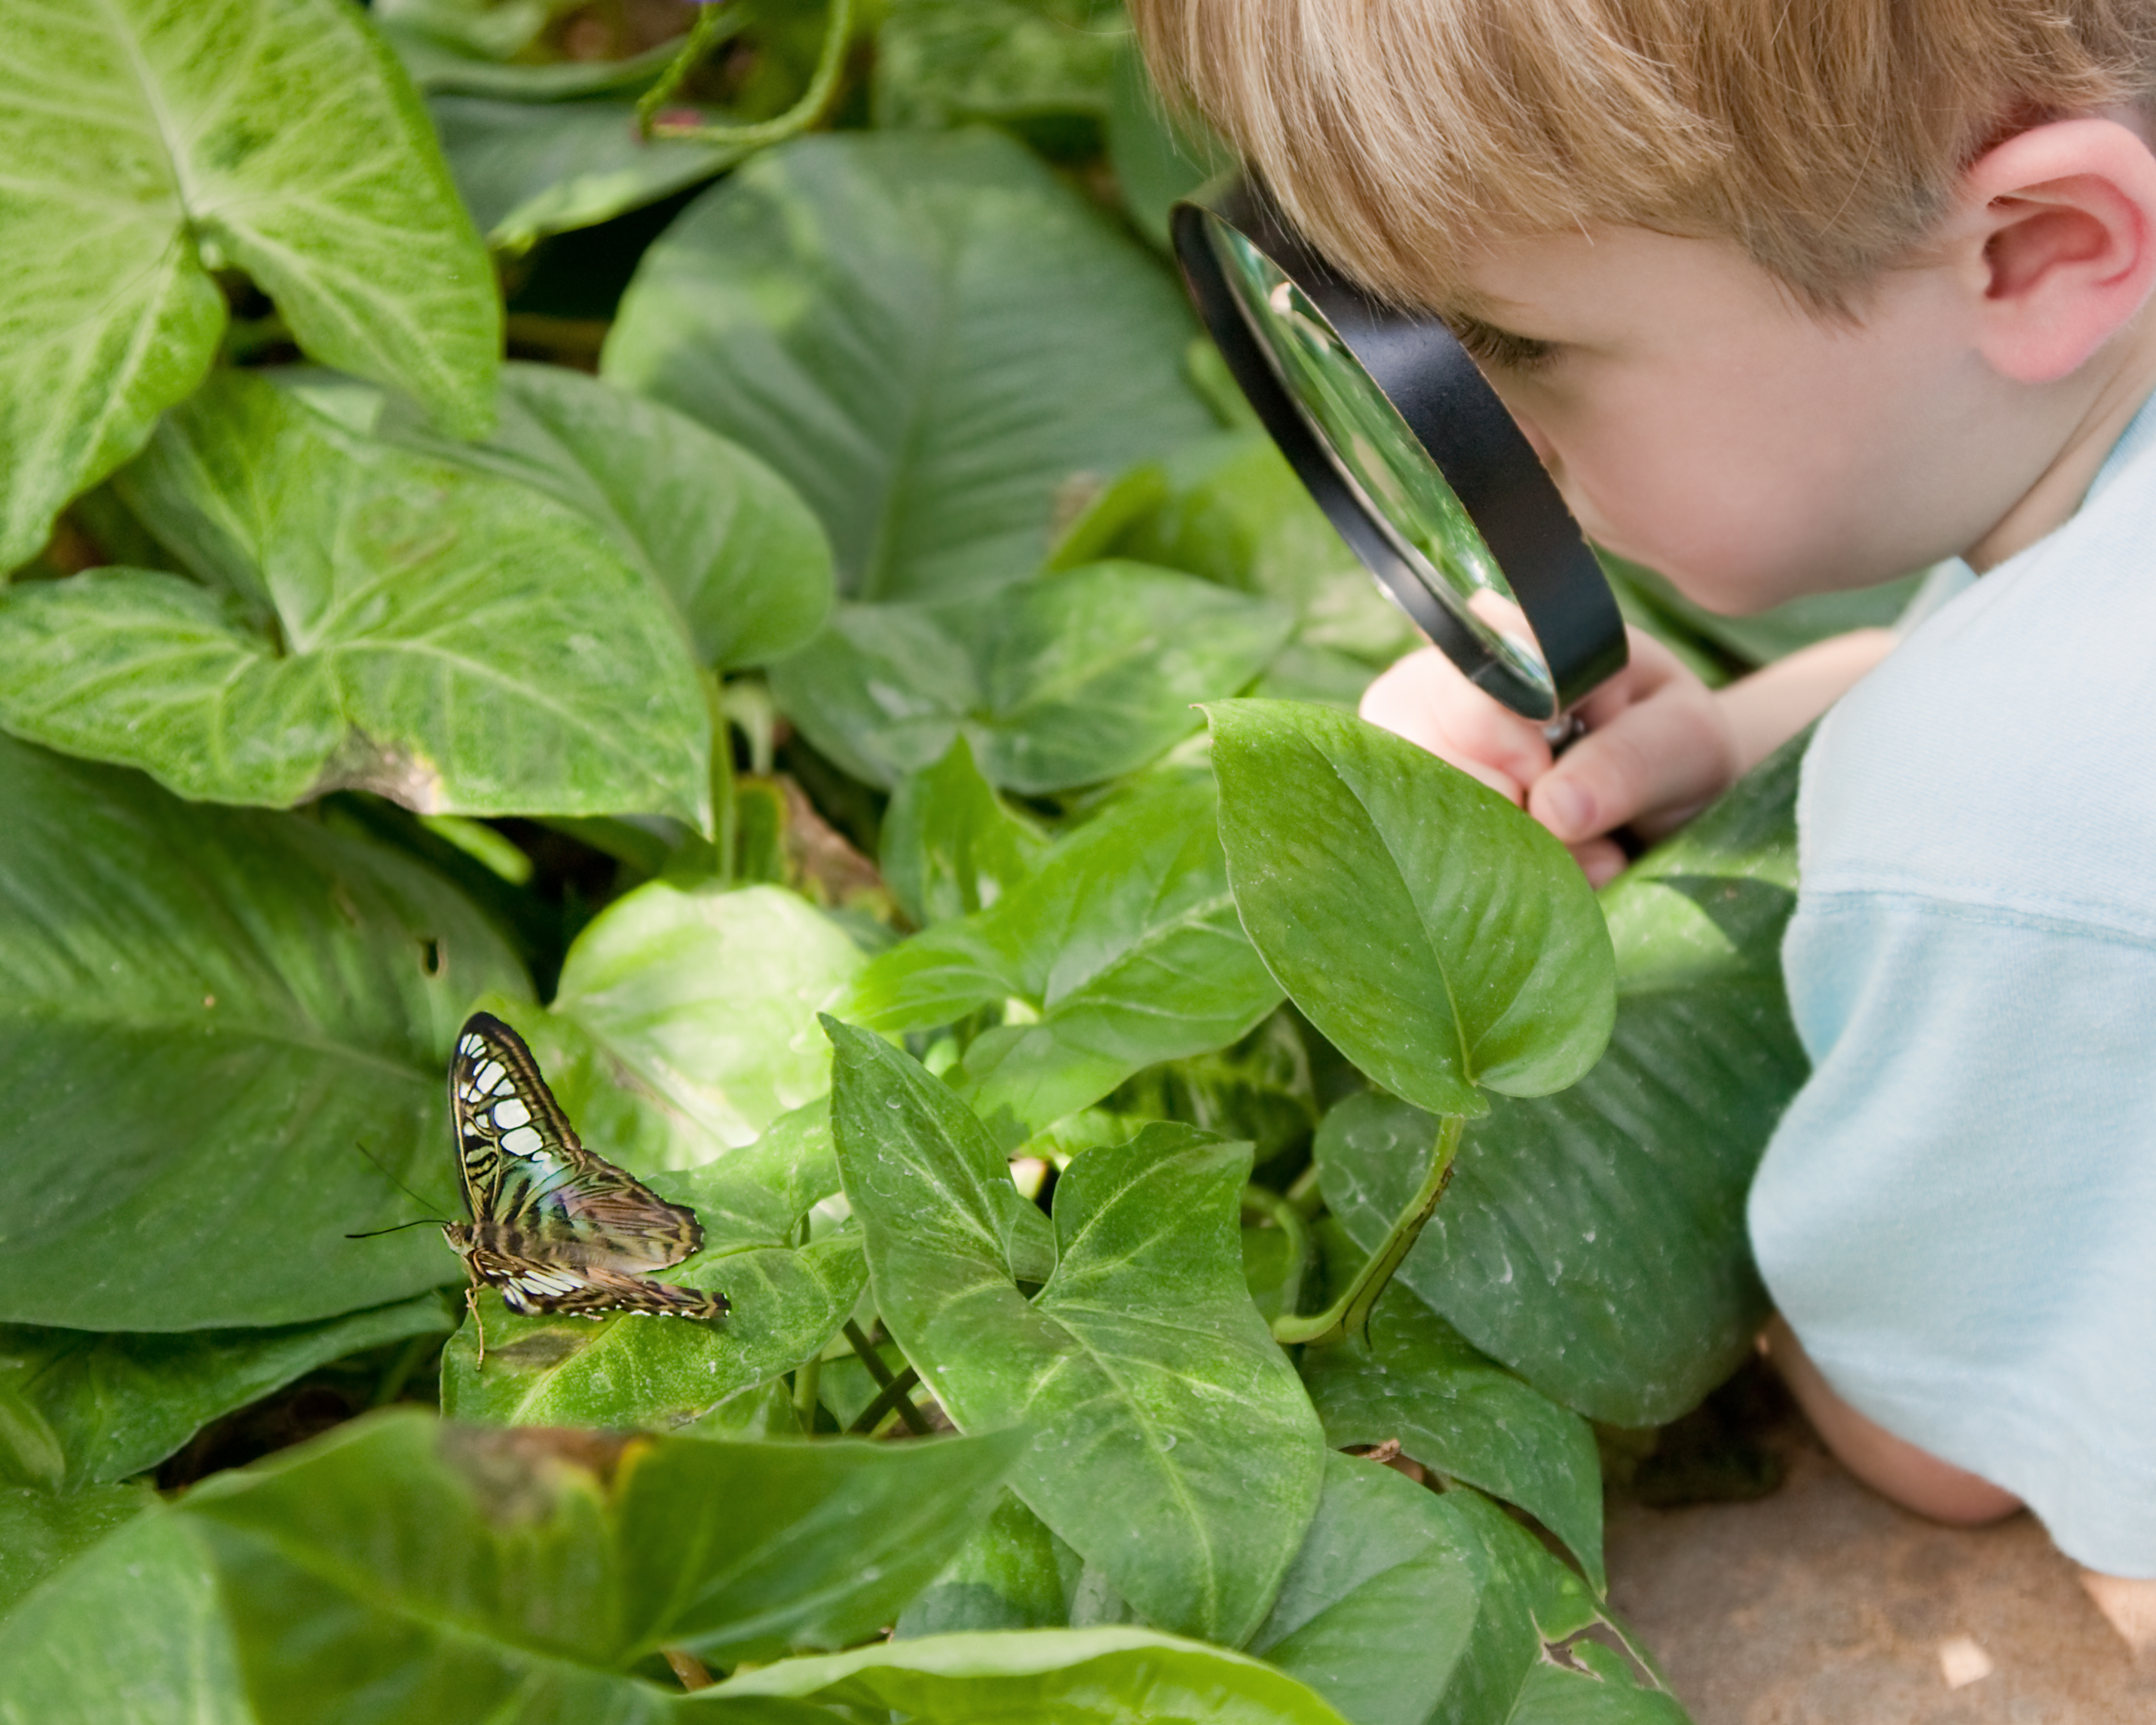 A child examines butterflies.